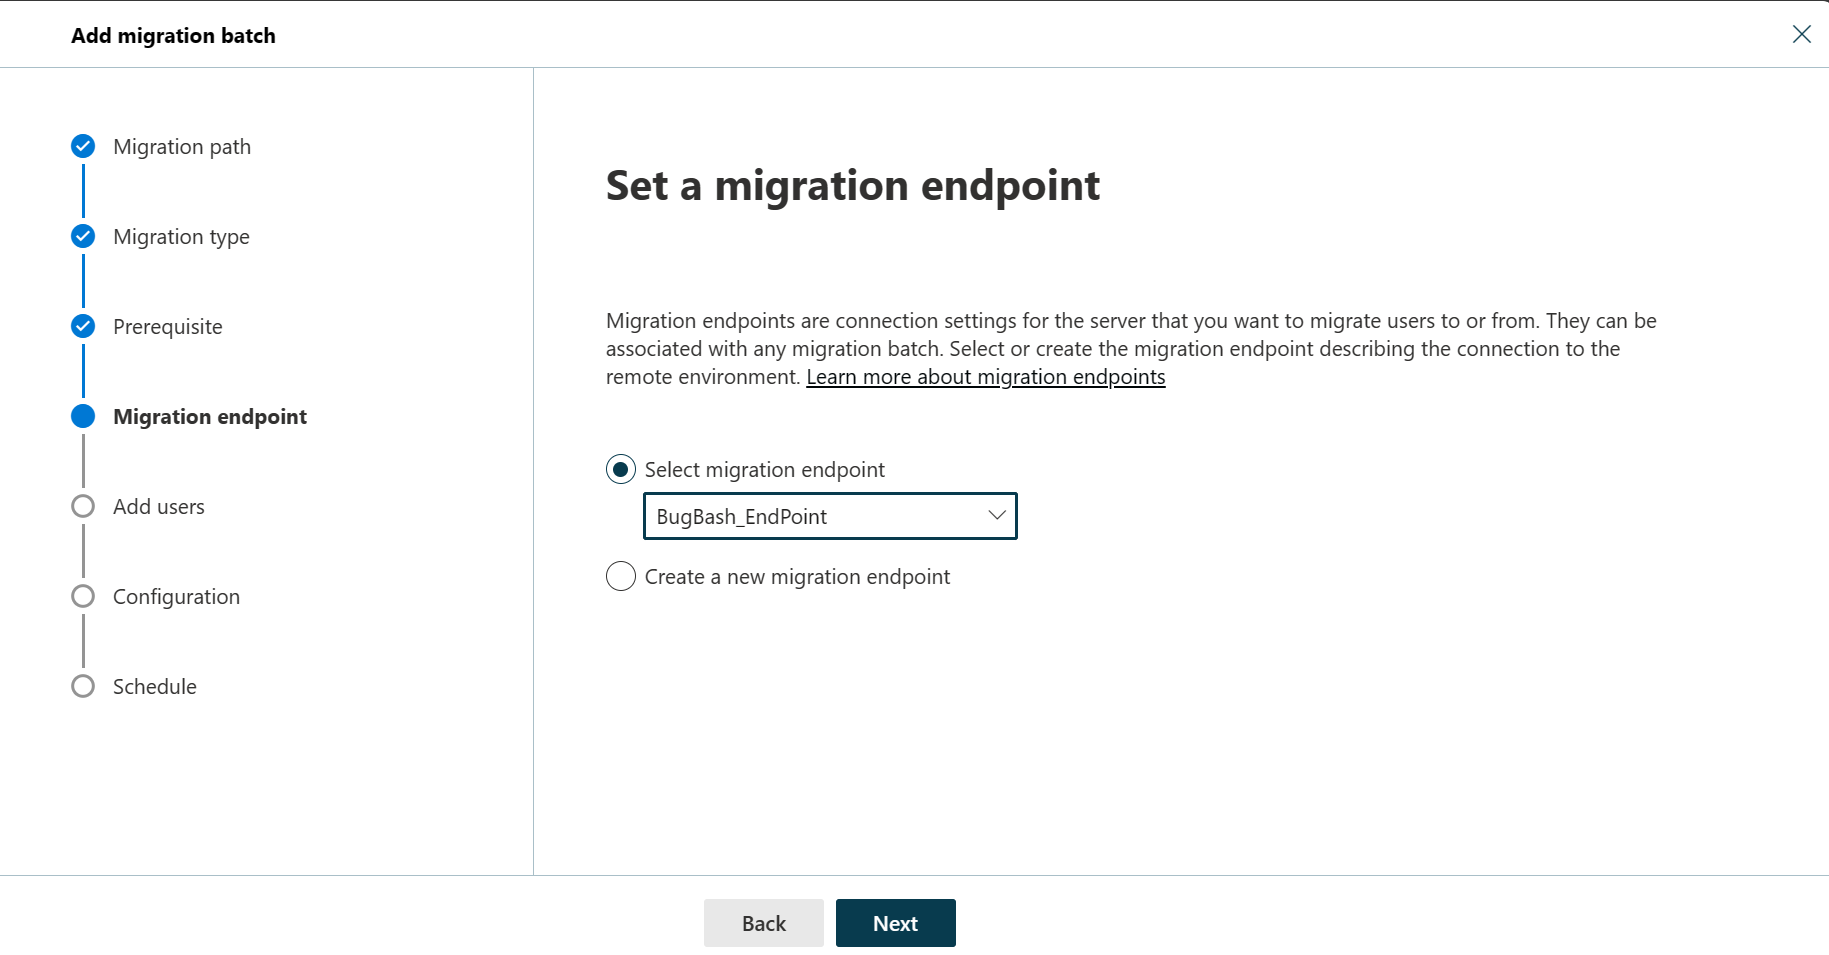 Screenshot of Set migration end point dialog where the user can select the migration endpoint or create a new migration endpoint, with the select migration endpoint option selected.